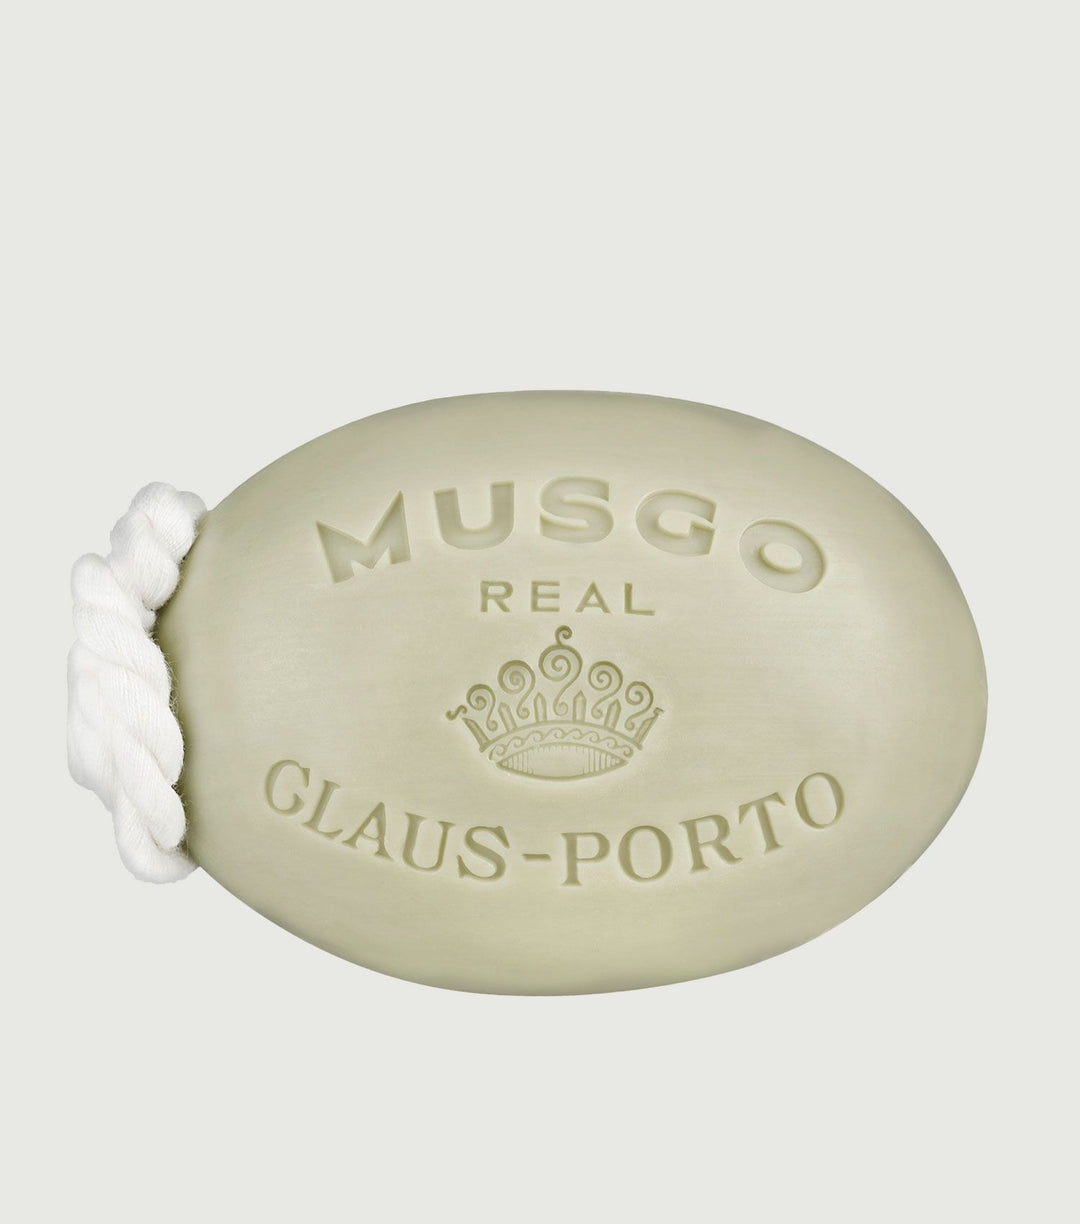 Soap on a Rope  Classic Scent - Musgo Real